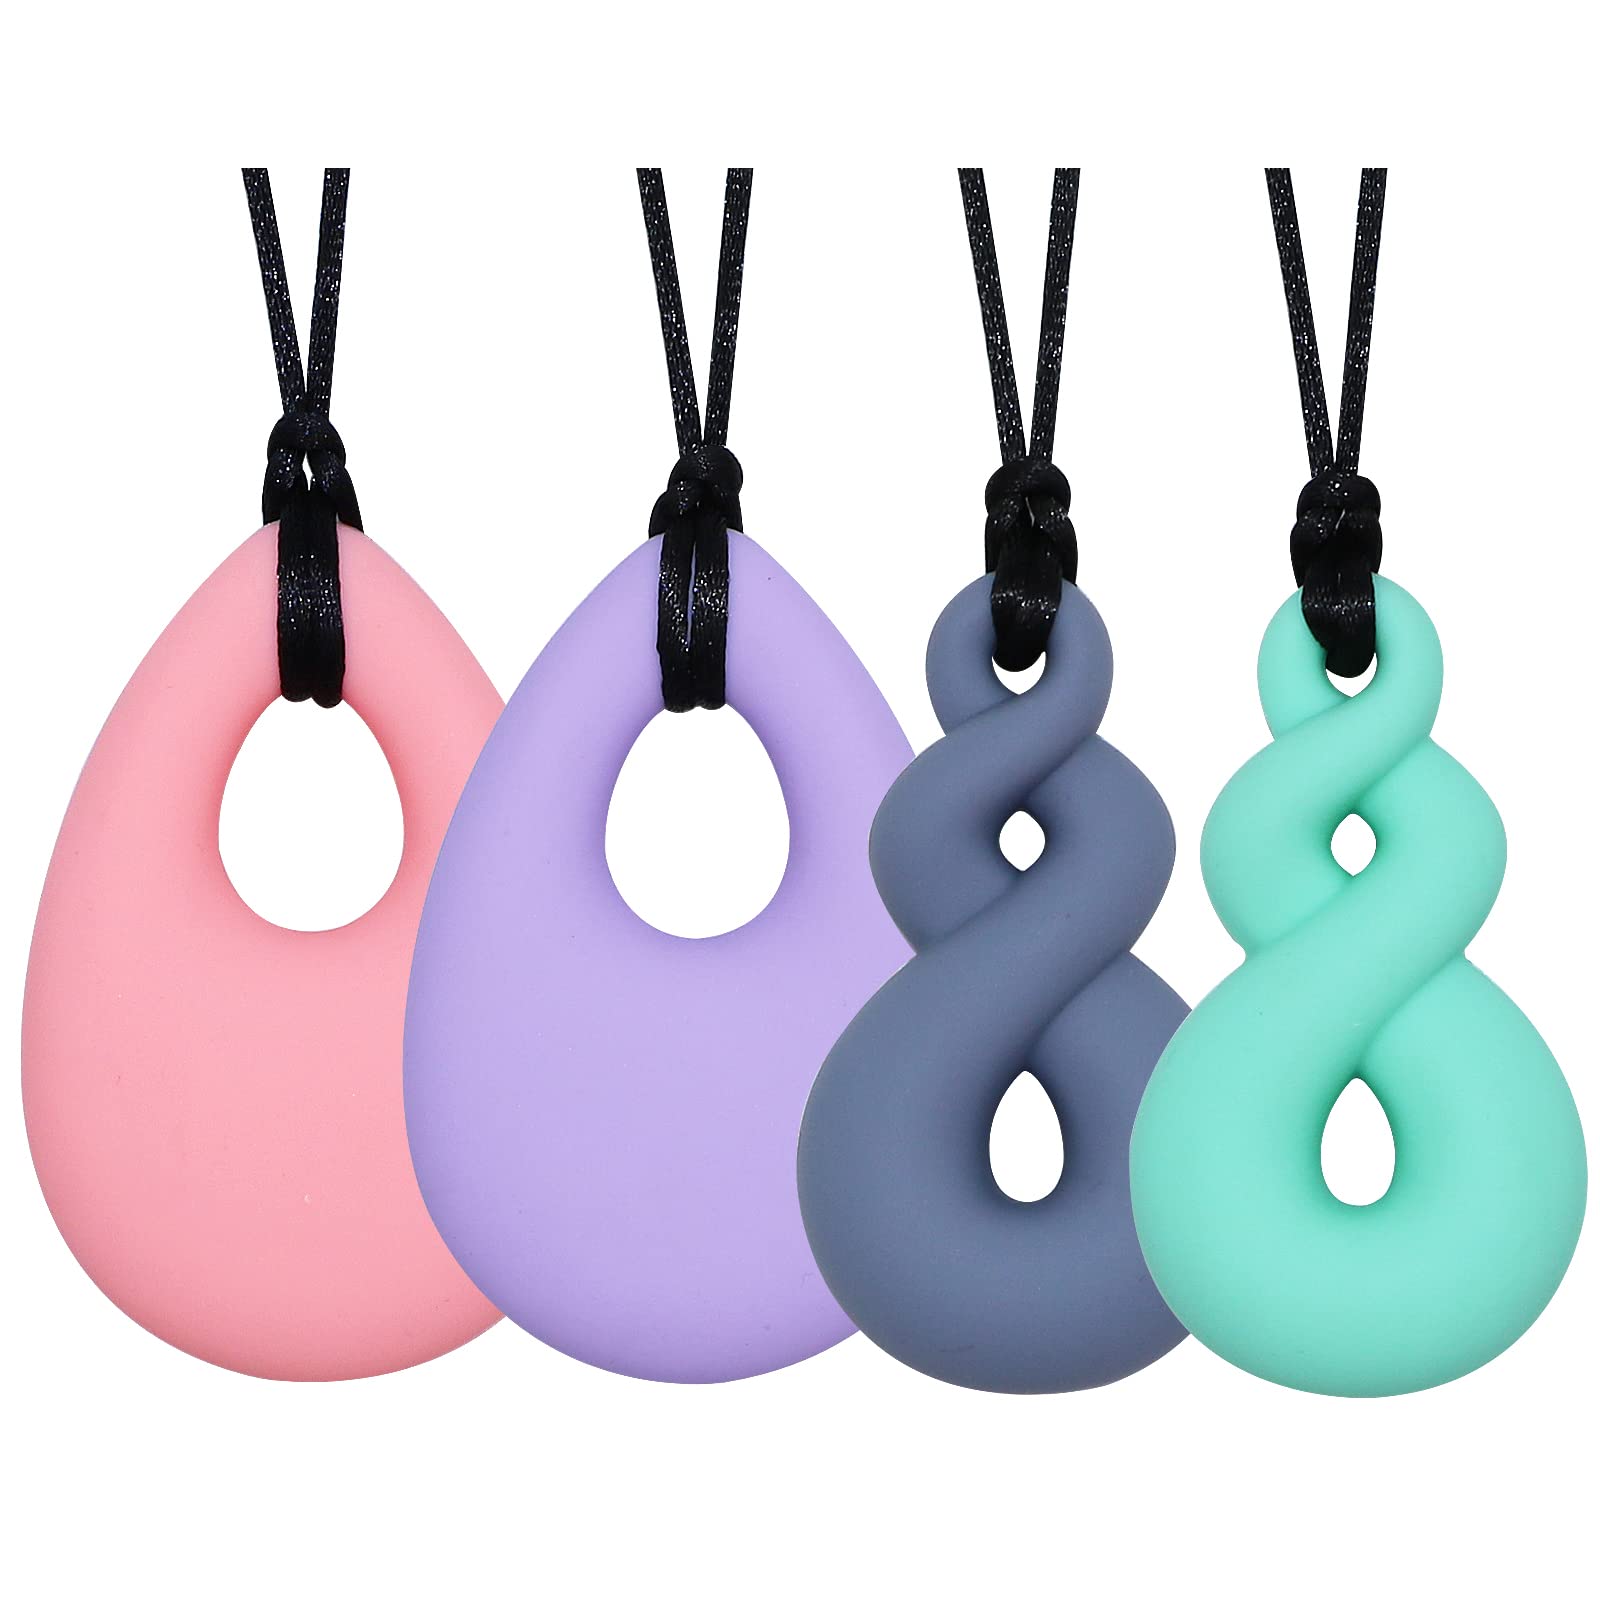 Buy Sensory Chew Necklaces for Kids Girls, Oral Fixation Autism Sensory Chew  Toys for Kids with Anxiety ADHD, Chewy Necklaces Sensory Fidgets Necklaces  for ADHD Chewing Sensory Online at Low Prices in